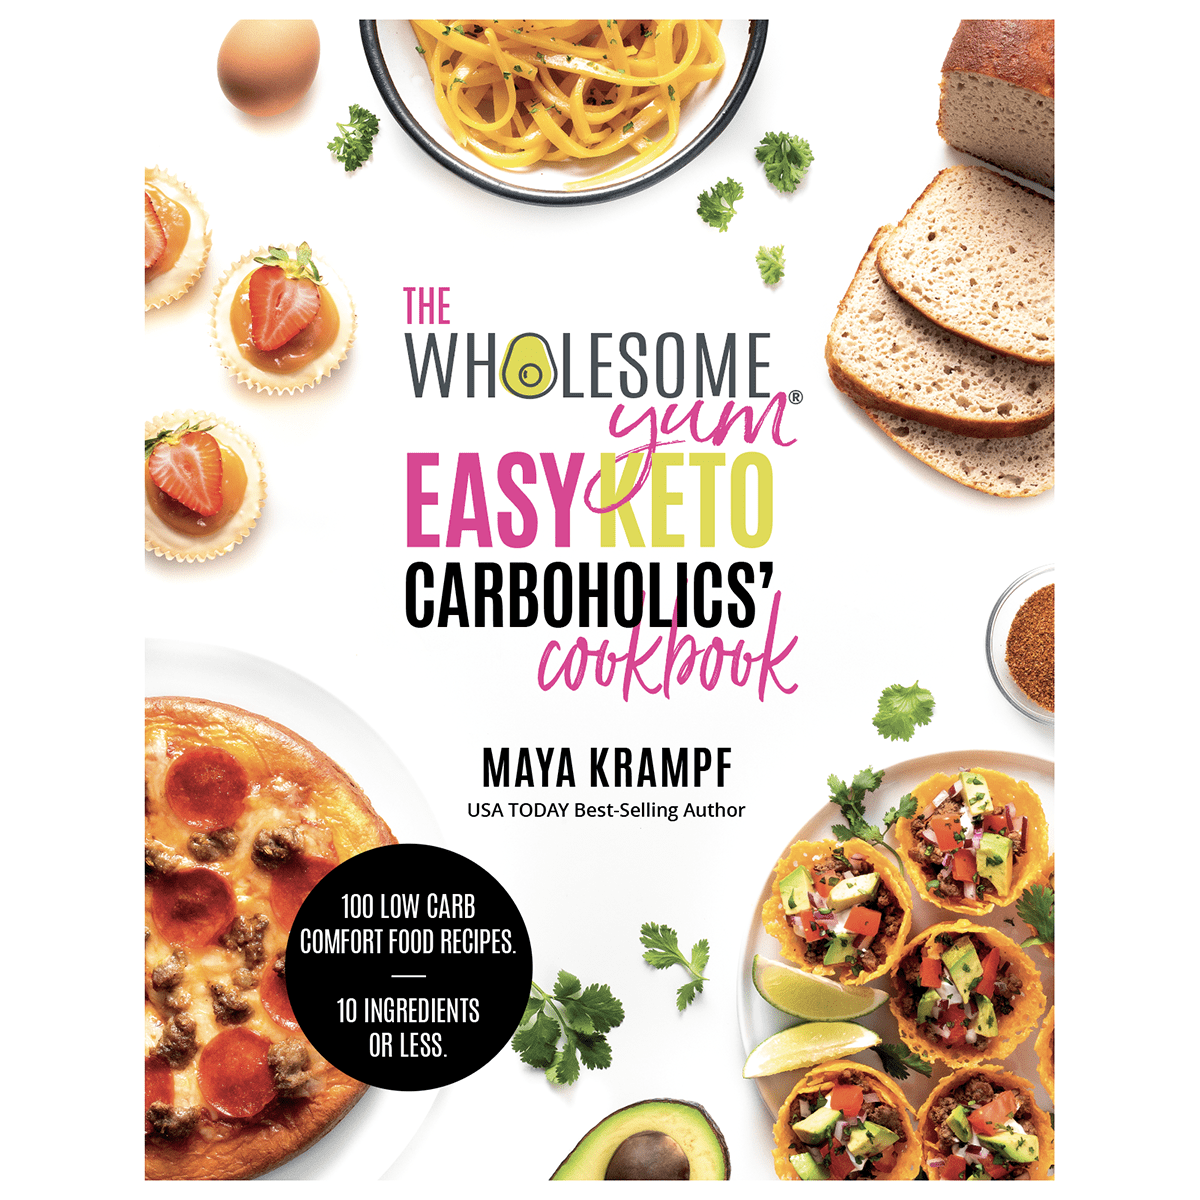 https://www.wholesomeyumfoods.com/wp-content/uploads/2022/06/the-easy-keto-carboholics-cookbook-1.png